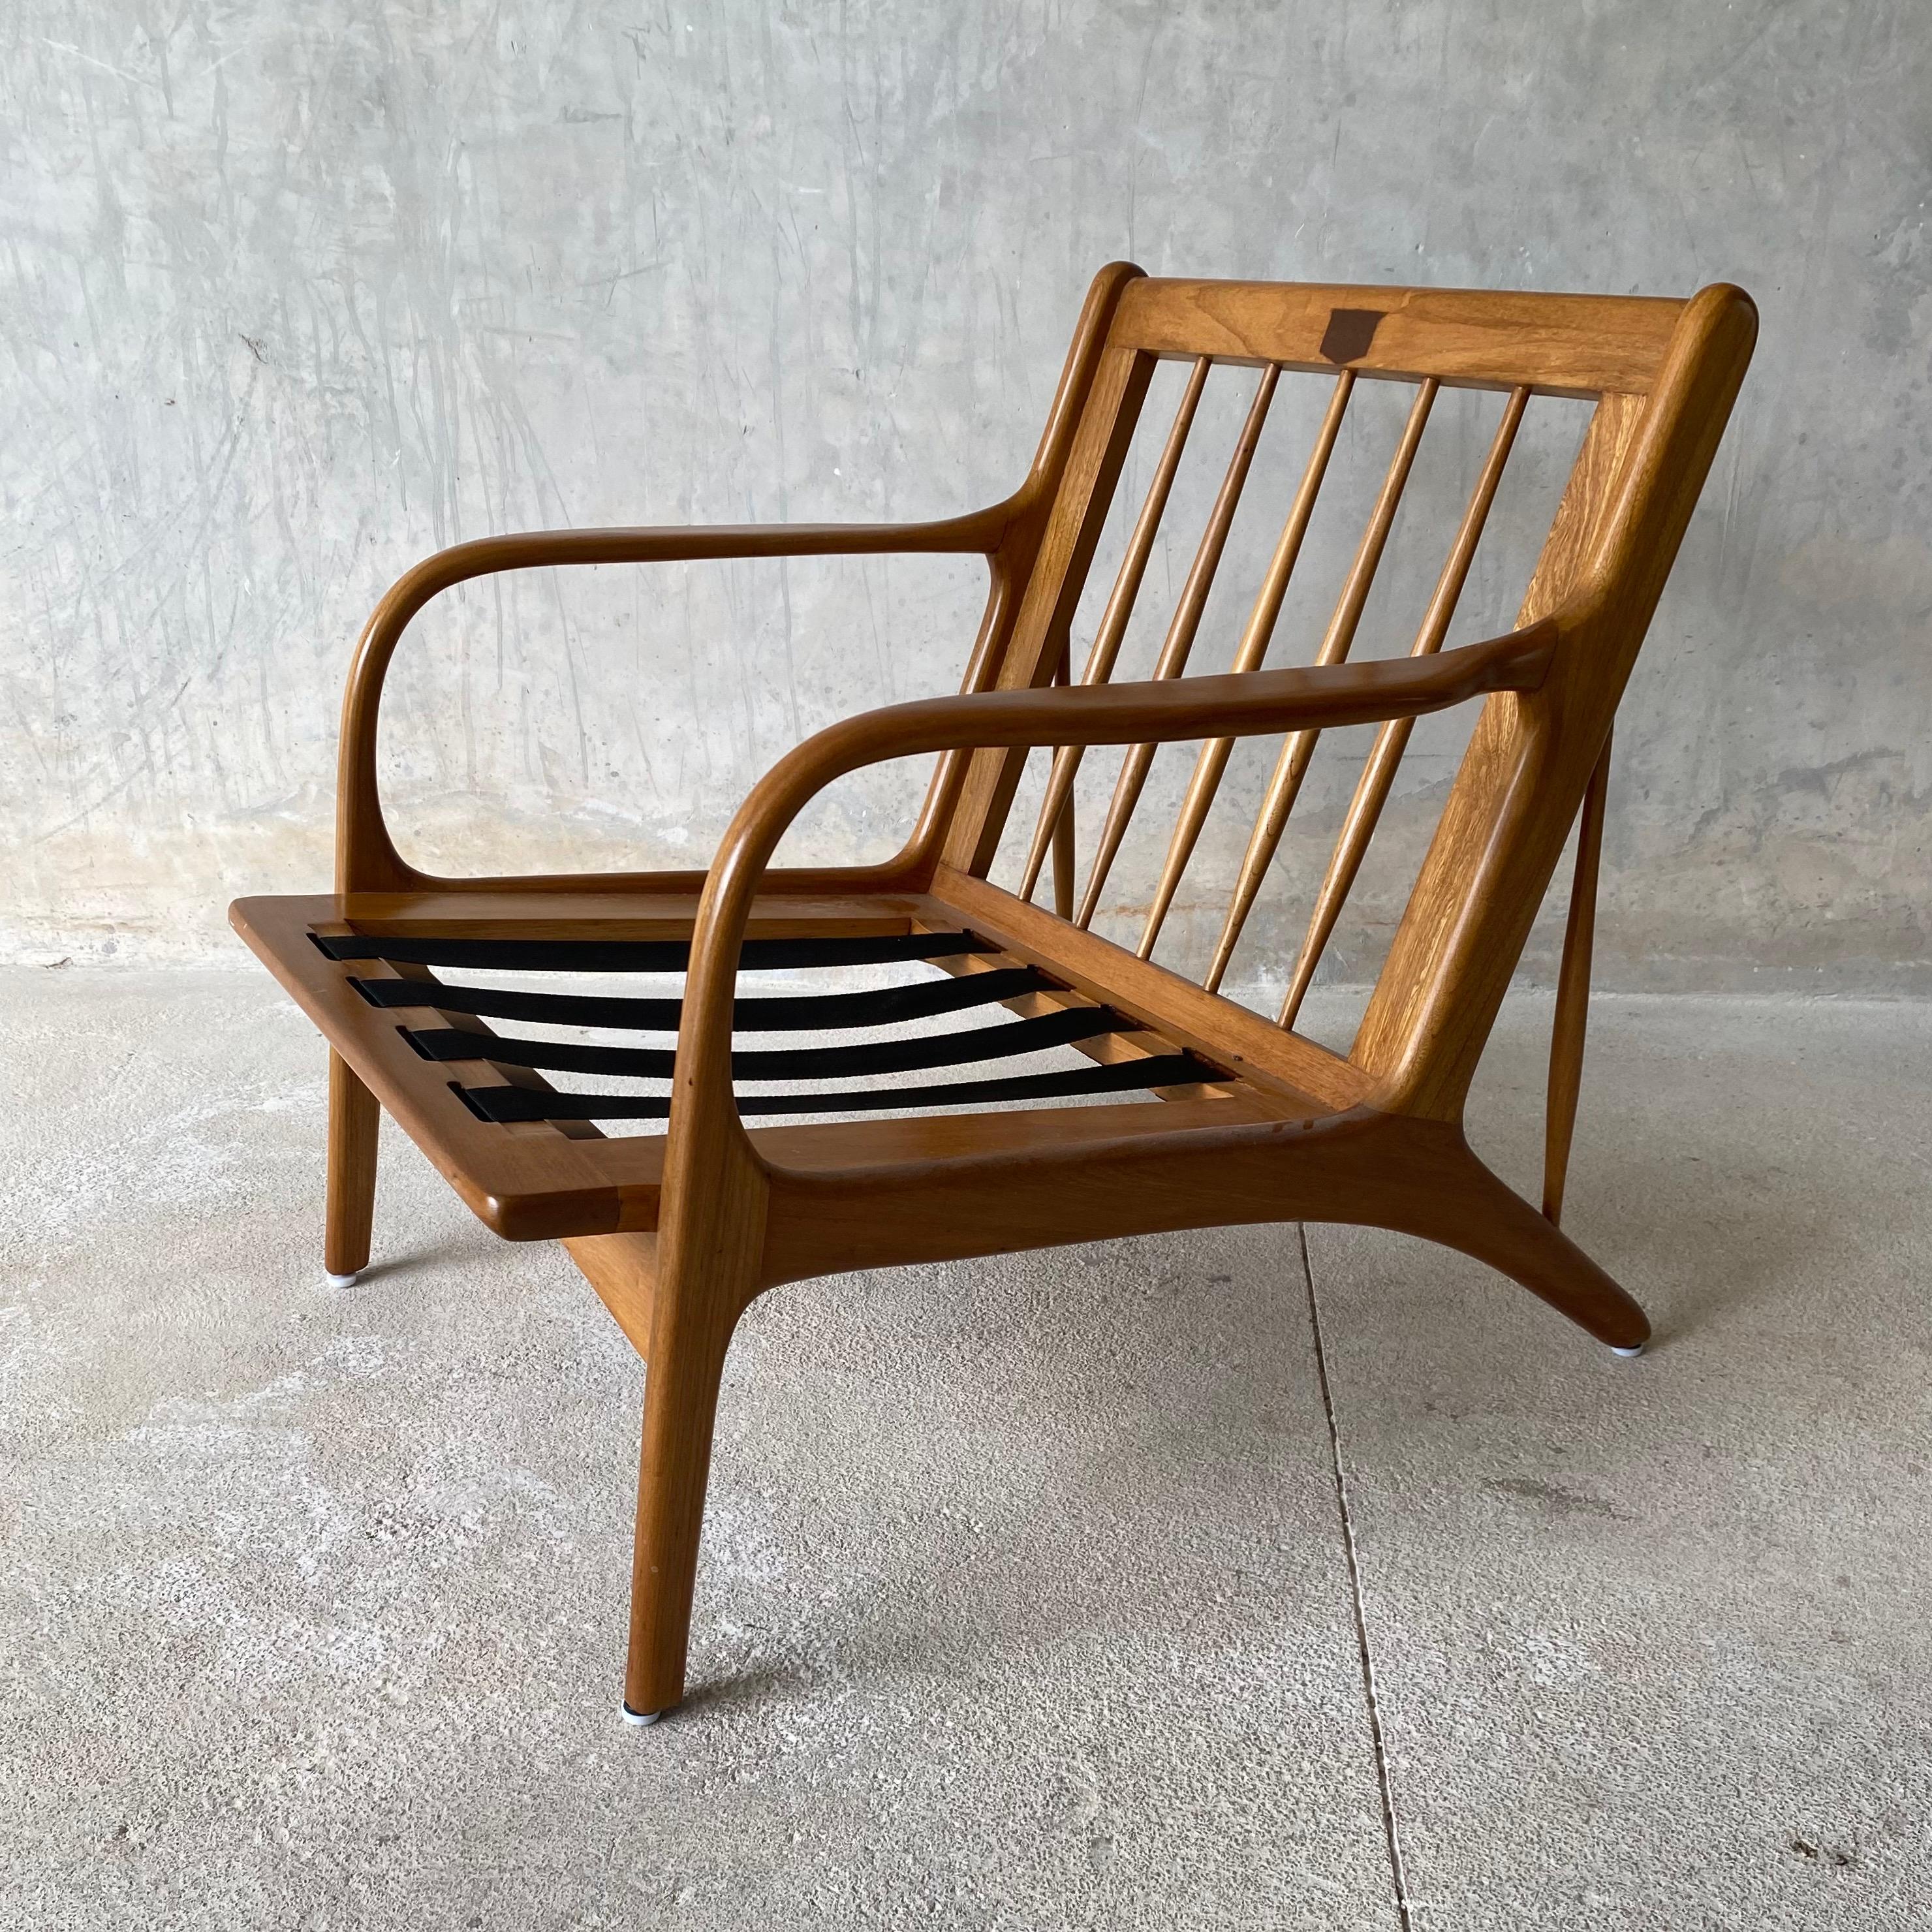 Mid-Century Modern Mexican Midcentury Lounge Chair, “Malinche“, 1950s For Sale